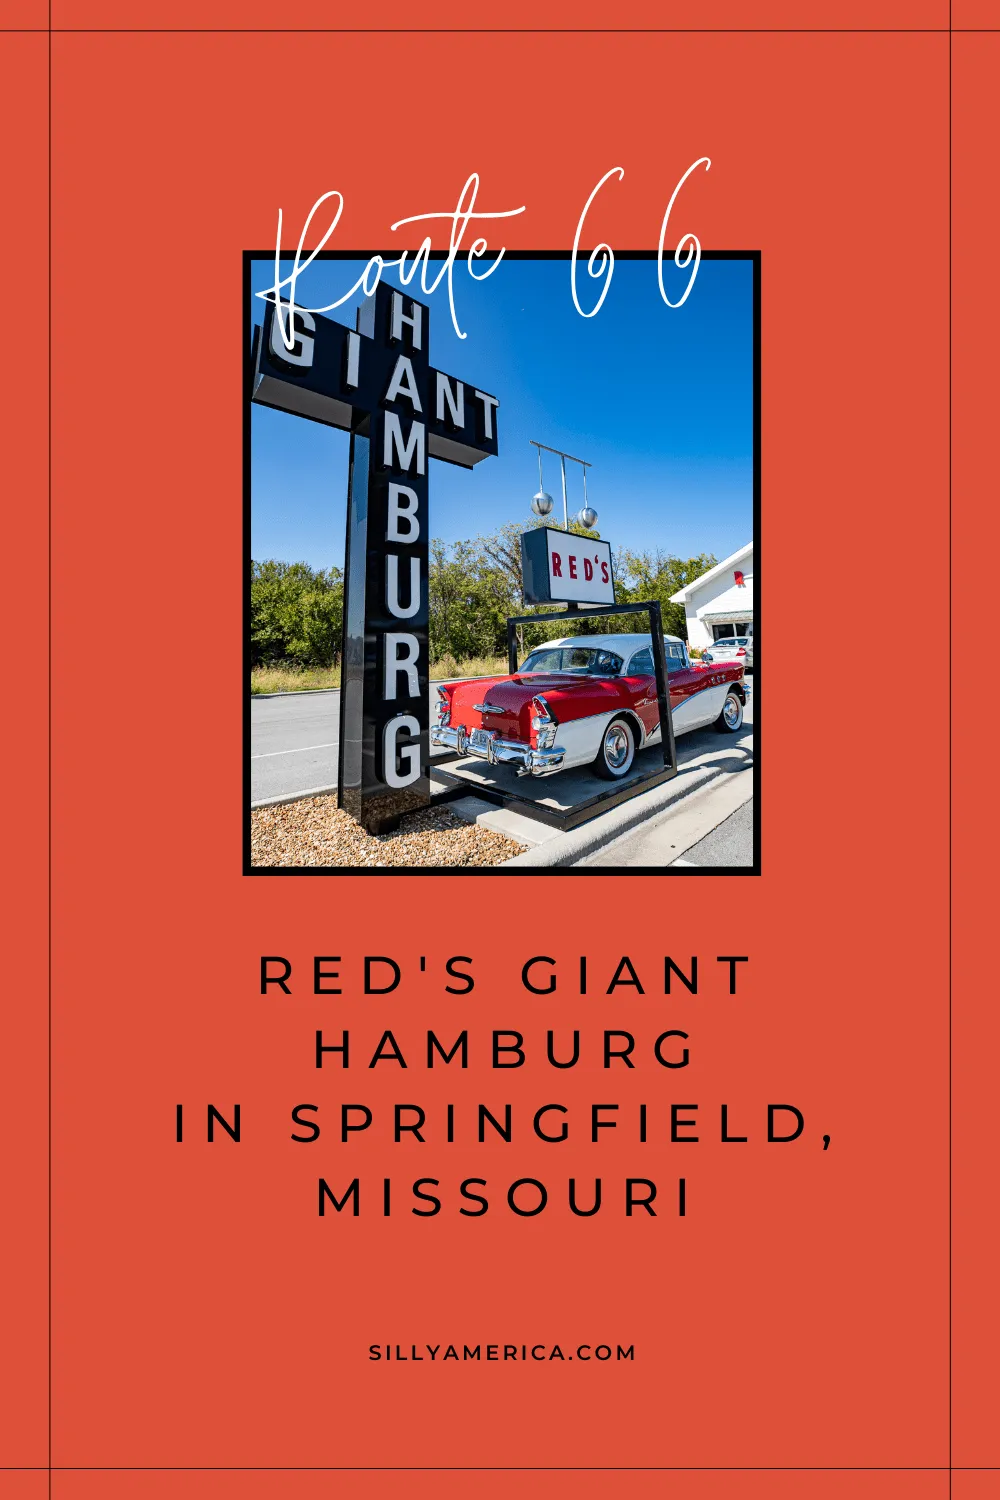 Red's Giant Hamburg first opened its doors on Route 66 in Springfield, Missouri in 1947. The Missouri restaurant was the world's first drive through and served burgers fries, and root beer on Route 66. A new version of the classic restaurant opened in 2019. #RoadTrips #RoadTripStop #Route66 #Route66RoadTrip #MissouriRoute66 #Missouri #MissouriRoadTrip #MissouriRoadsideAttractions #RoadsideAttractions #RoadsideAttraction #RoadsideAmerica #RoadTrip